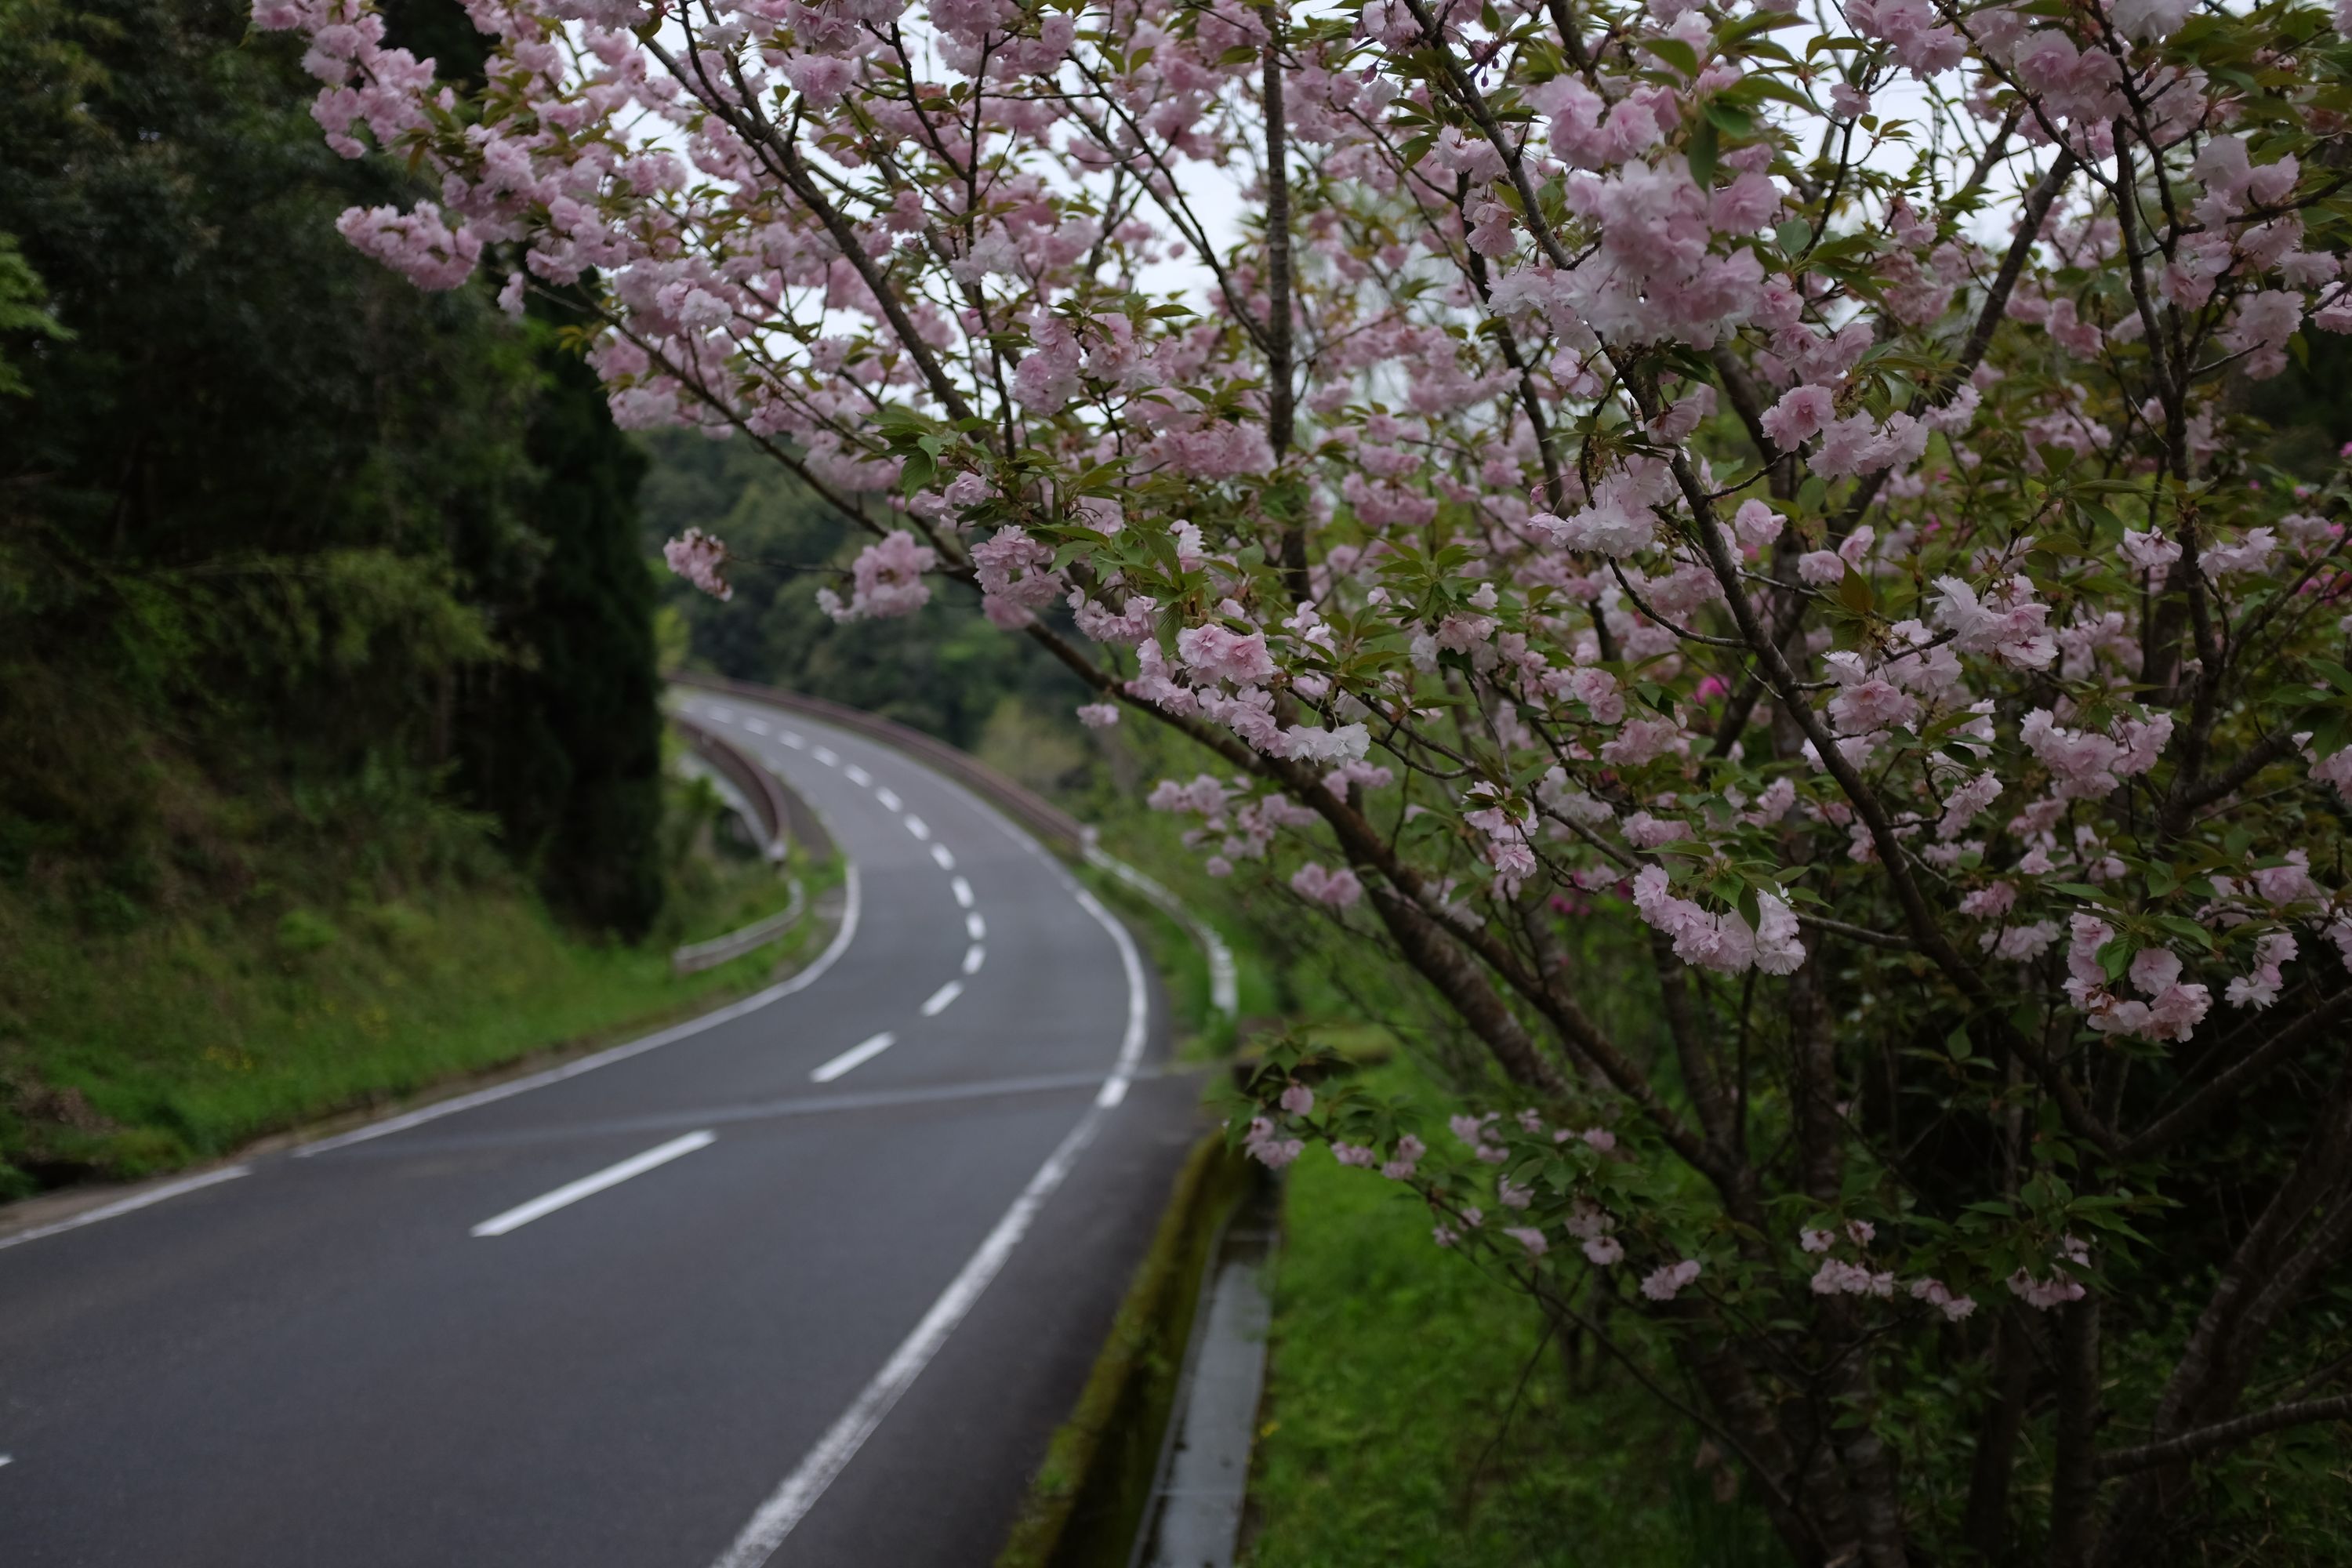 A small cherry tree in bloom by the side of a winding country road.